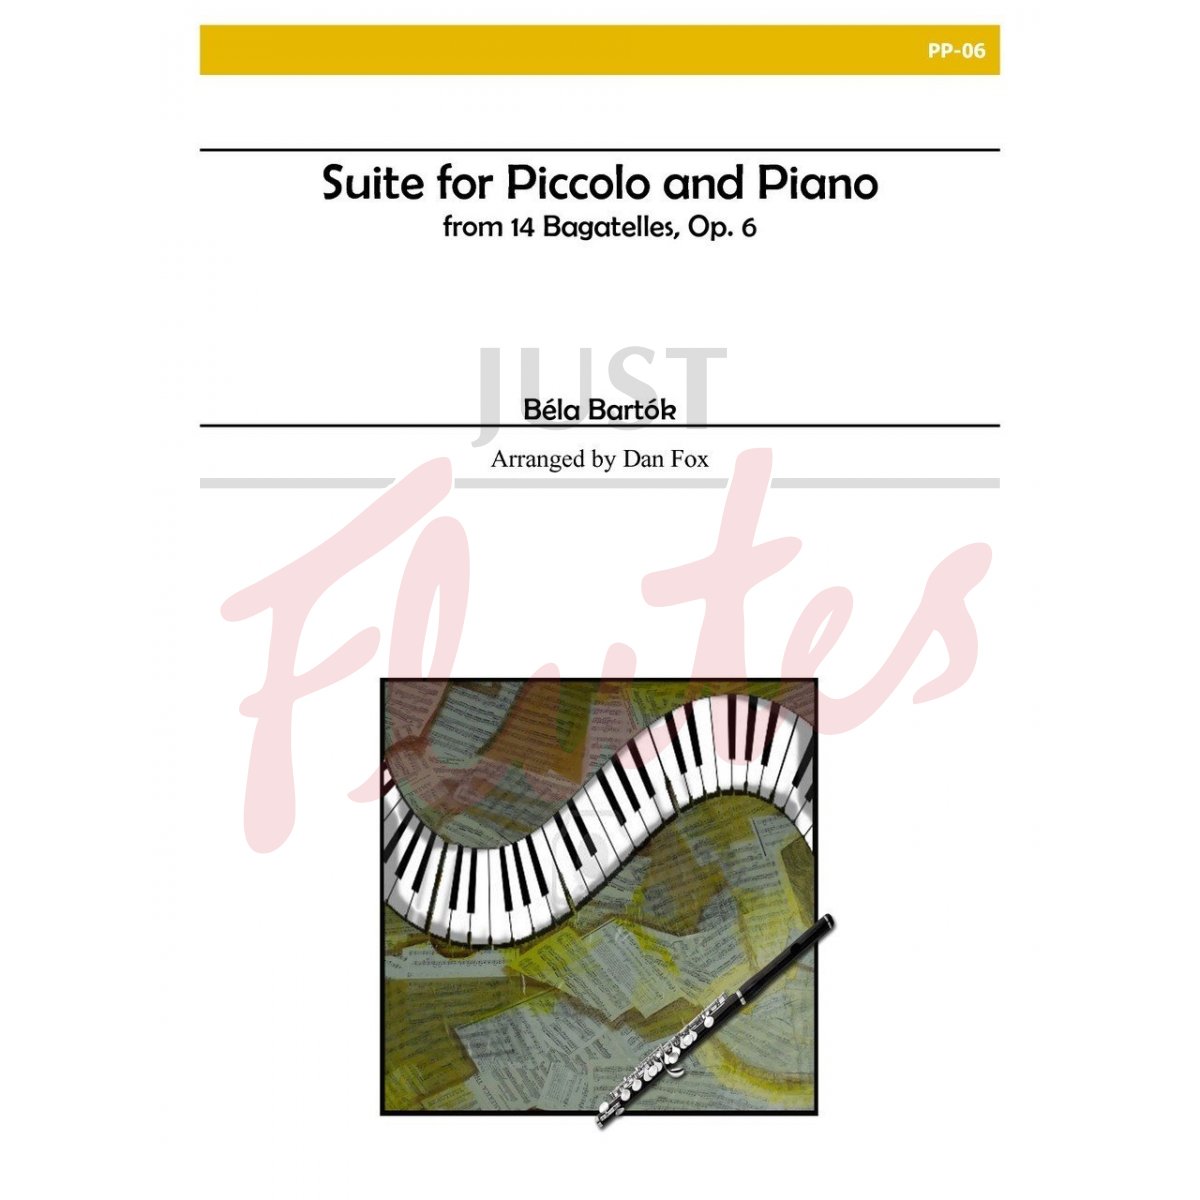 Suite for Piccolo and Piano